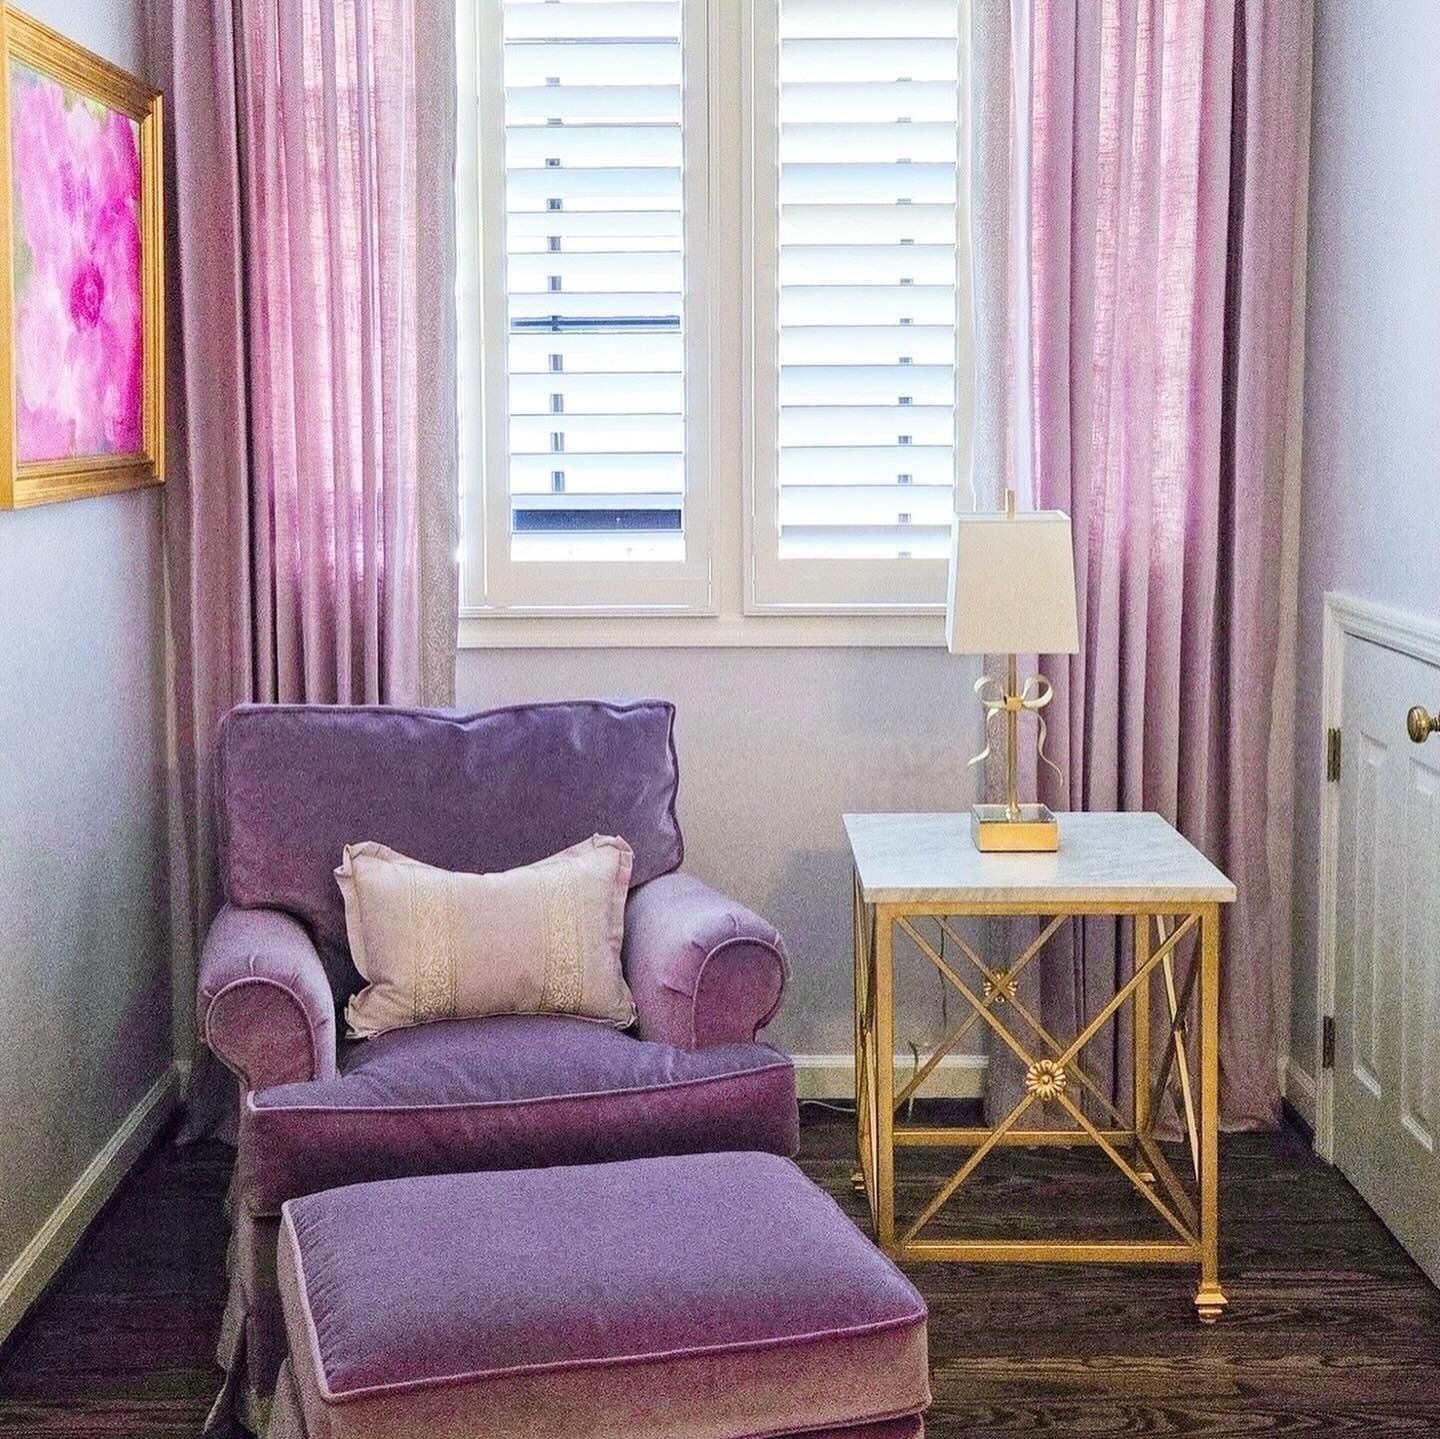 A touch of lavender elegance, with a shot of hot pink.🩷💜🩷
⠀⠀⠀⠀⠀⠀⠀⠀⠀
This sweet nook in a young lady&rsquo;s bedroom is cozy &amp; fresh, with a mix of classic &amp; traditional details. Custom linen drapery panels not only frame the window, but al